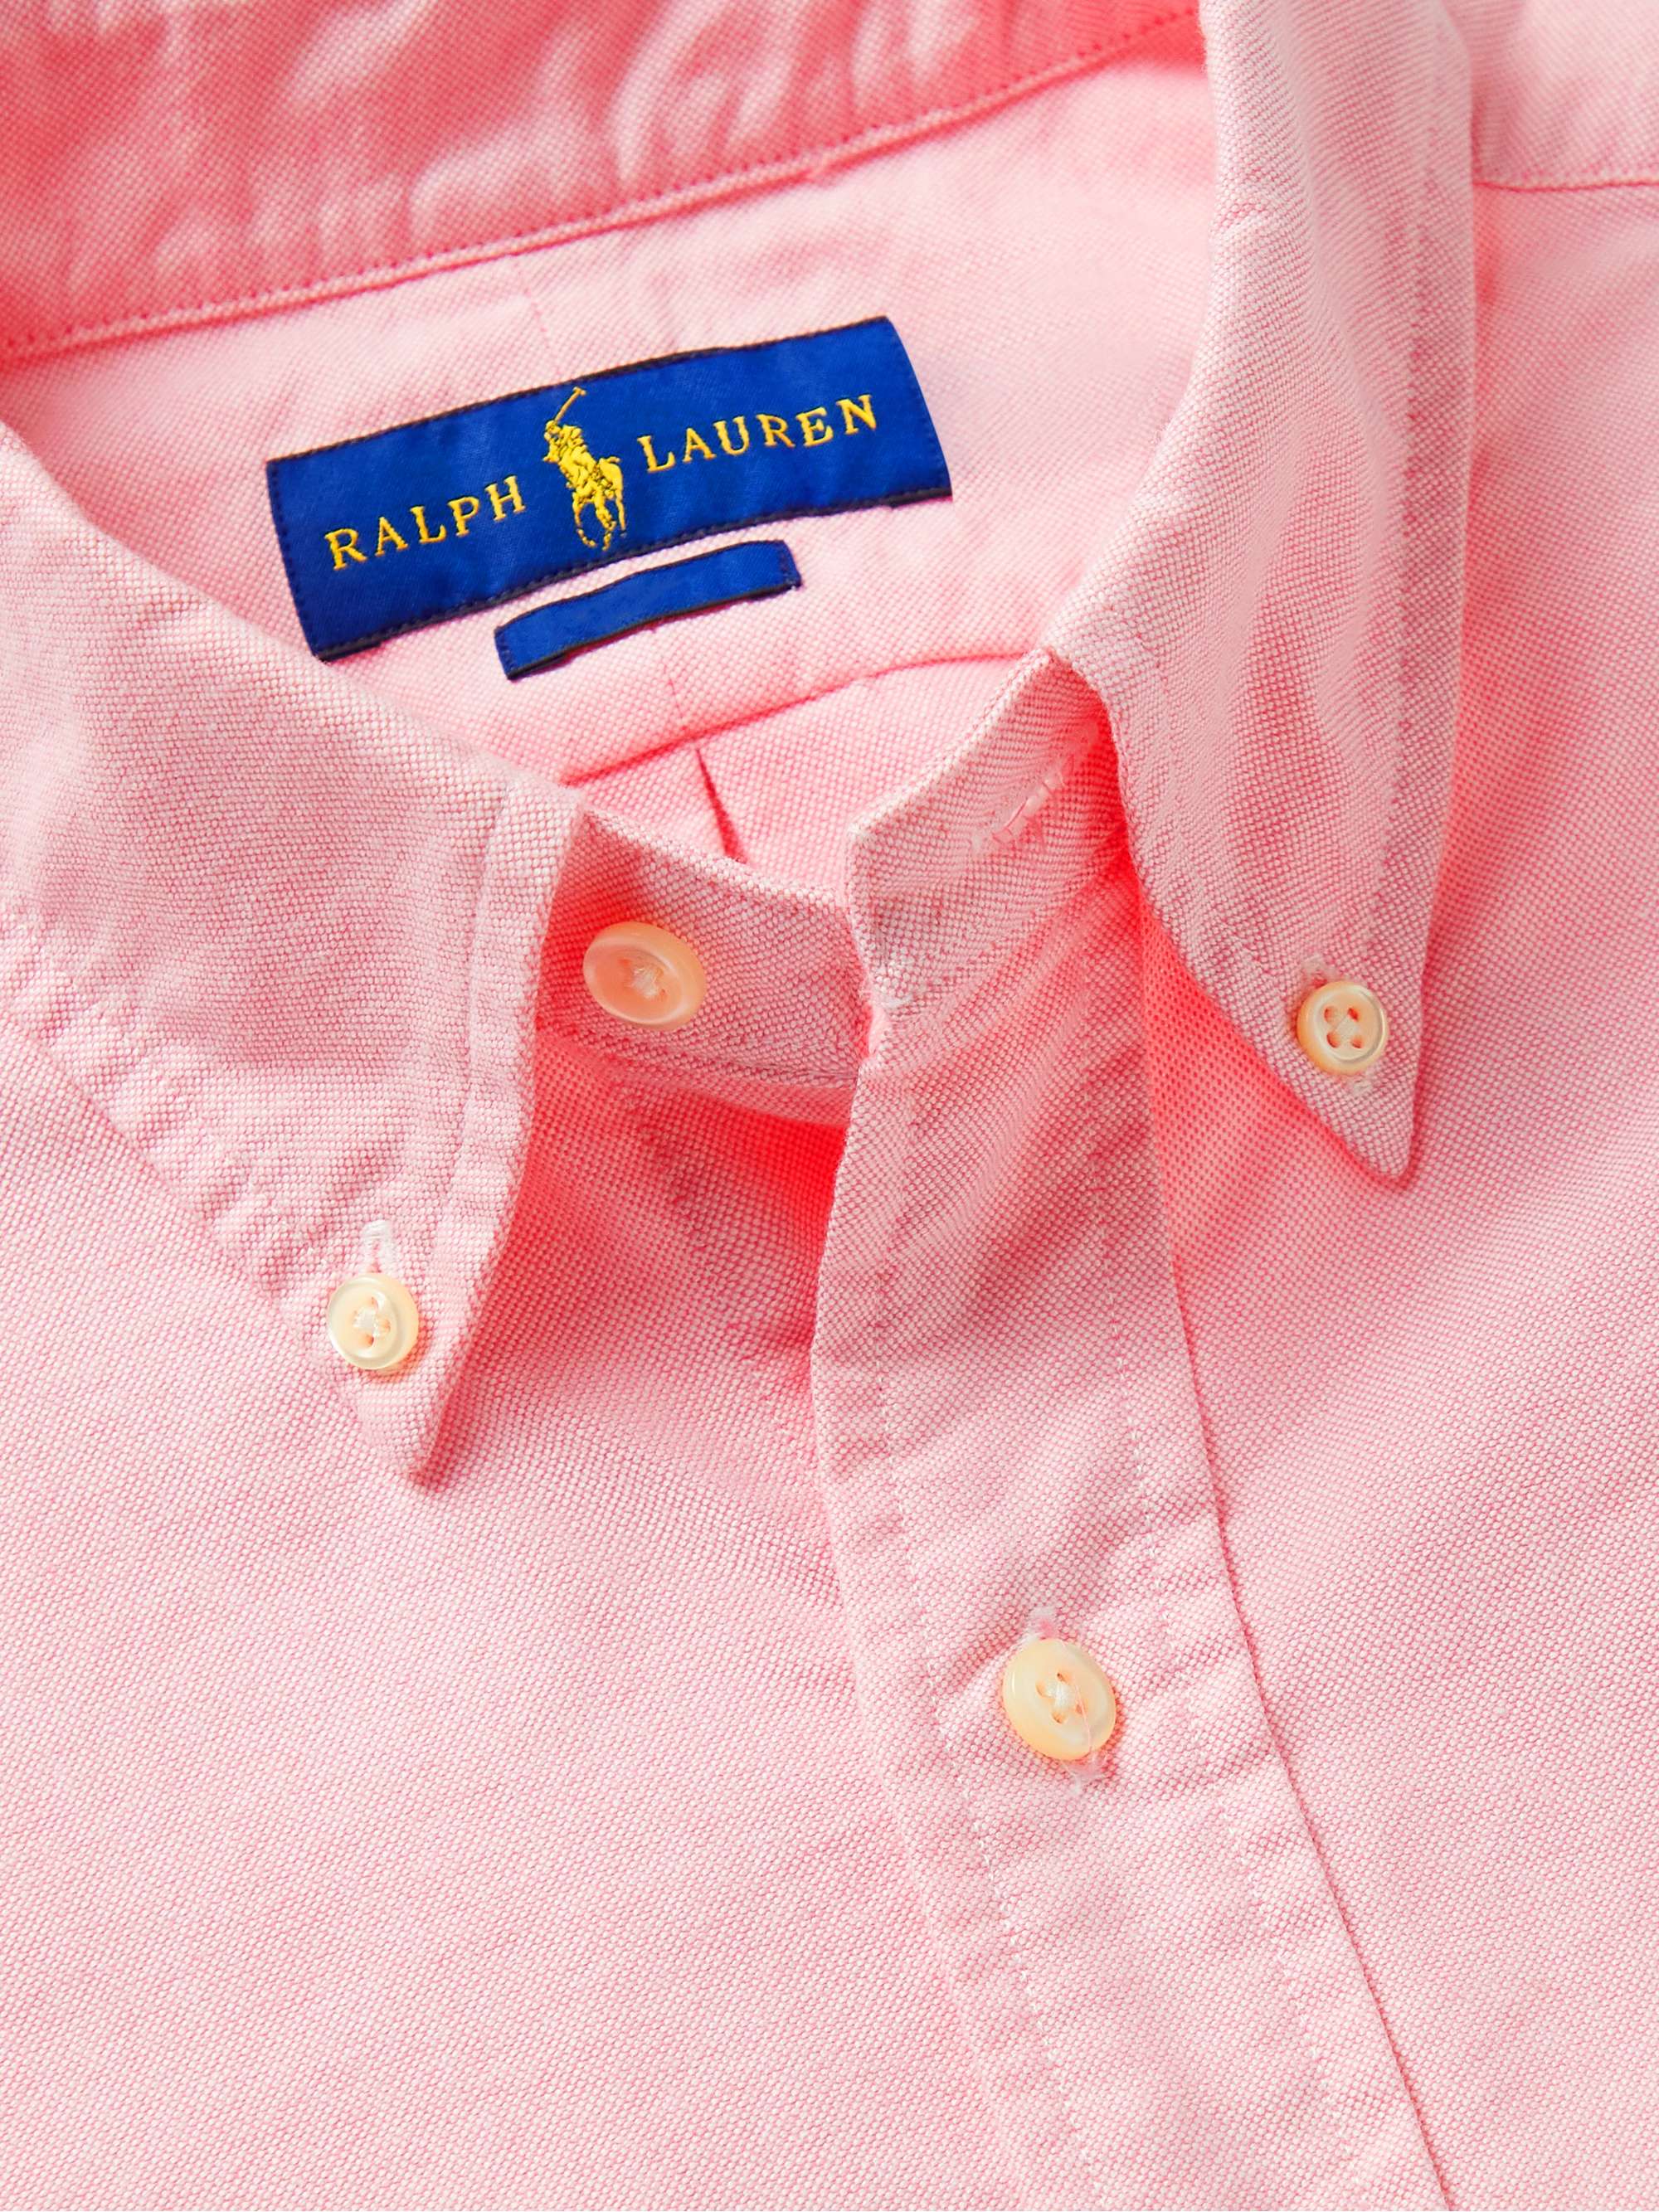 Mens Clothing Shirts Casual shirts and button-up shirts Polo Ralph Lauren Shirt in Pink for Men 